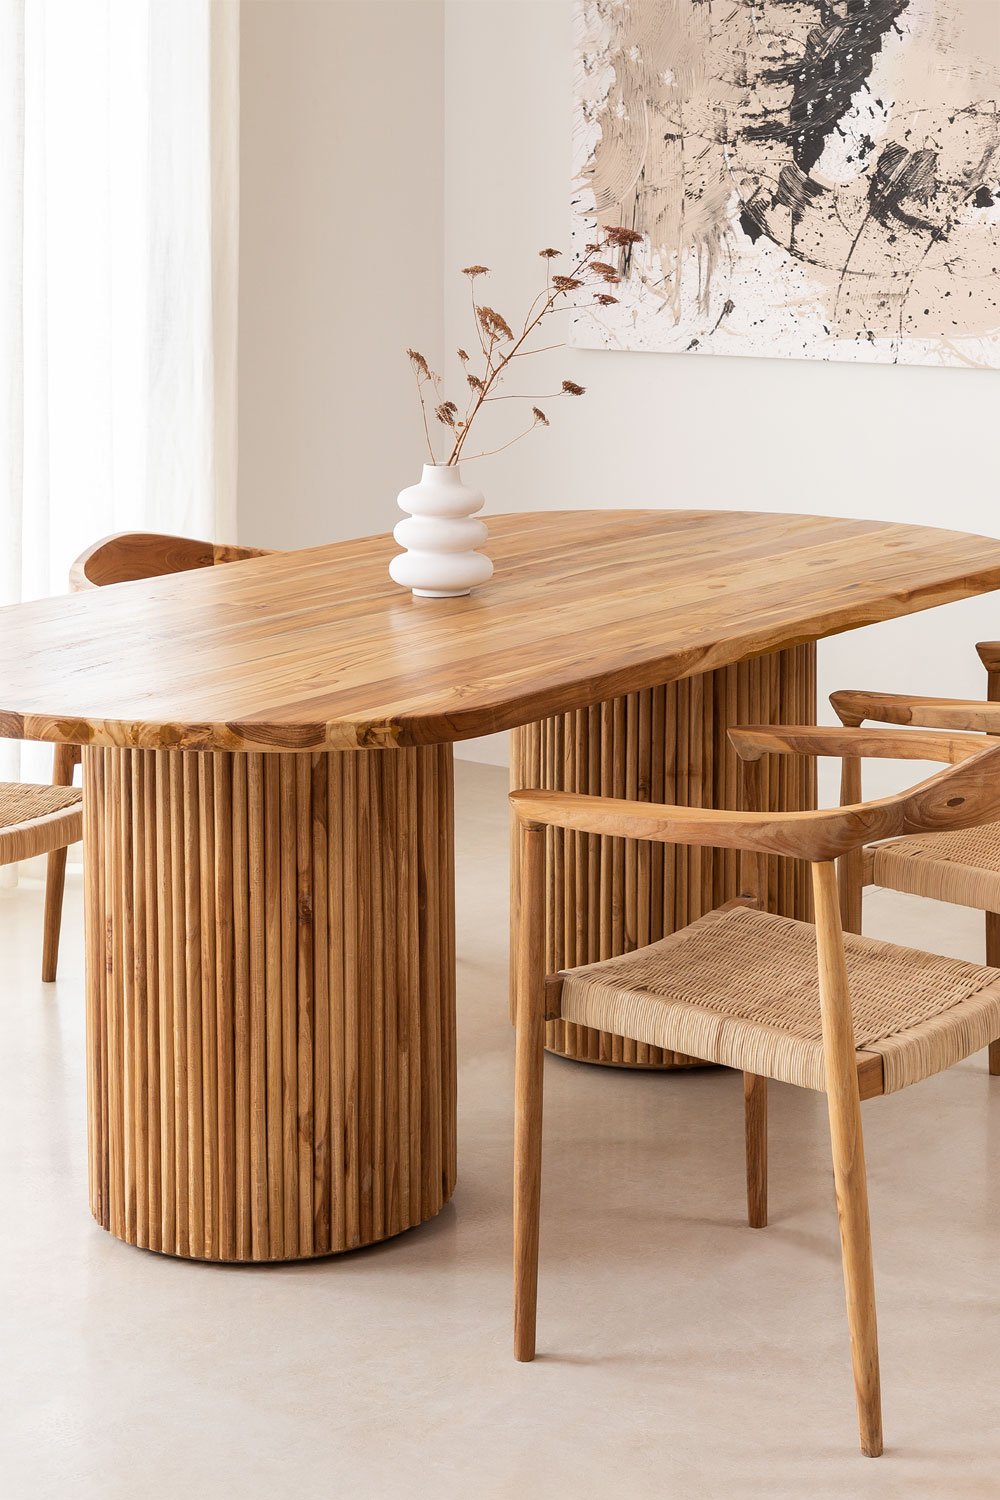 Oval Teak Table Set (200x110 cm) Randall and 4 Dining Chairs with Armrests Kiemer , gallery image 1